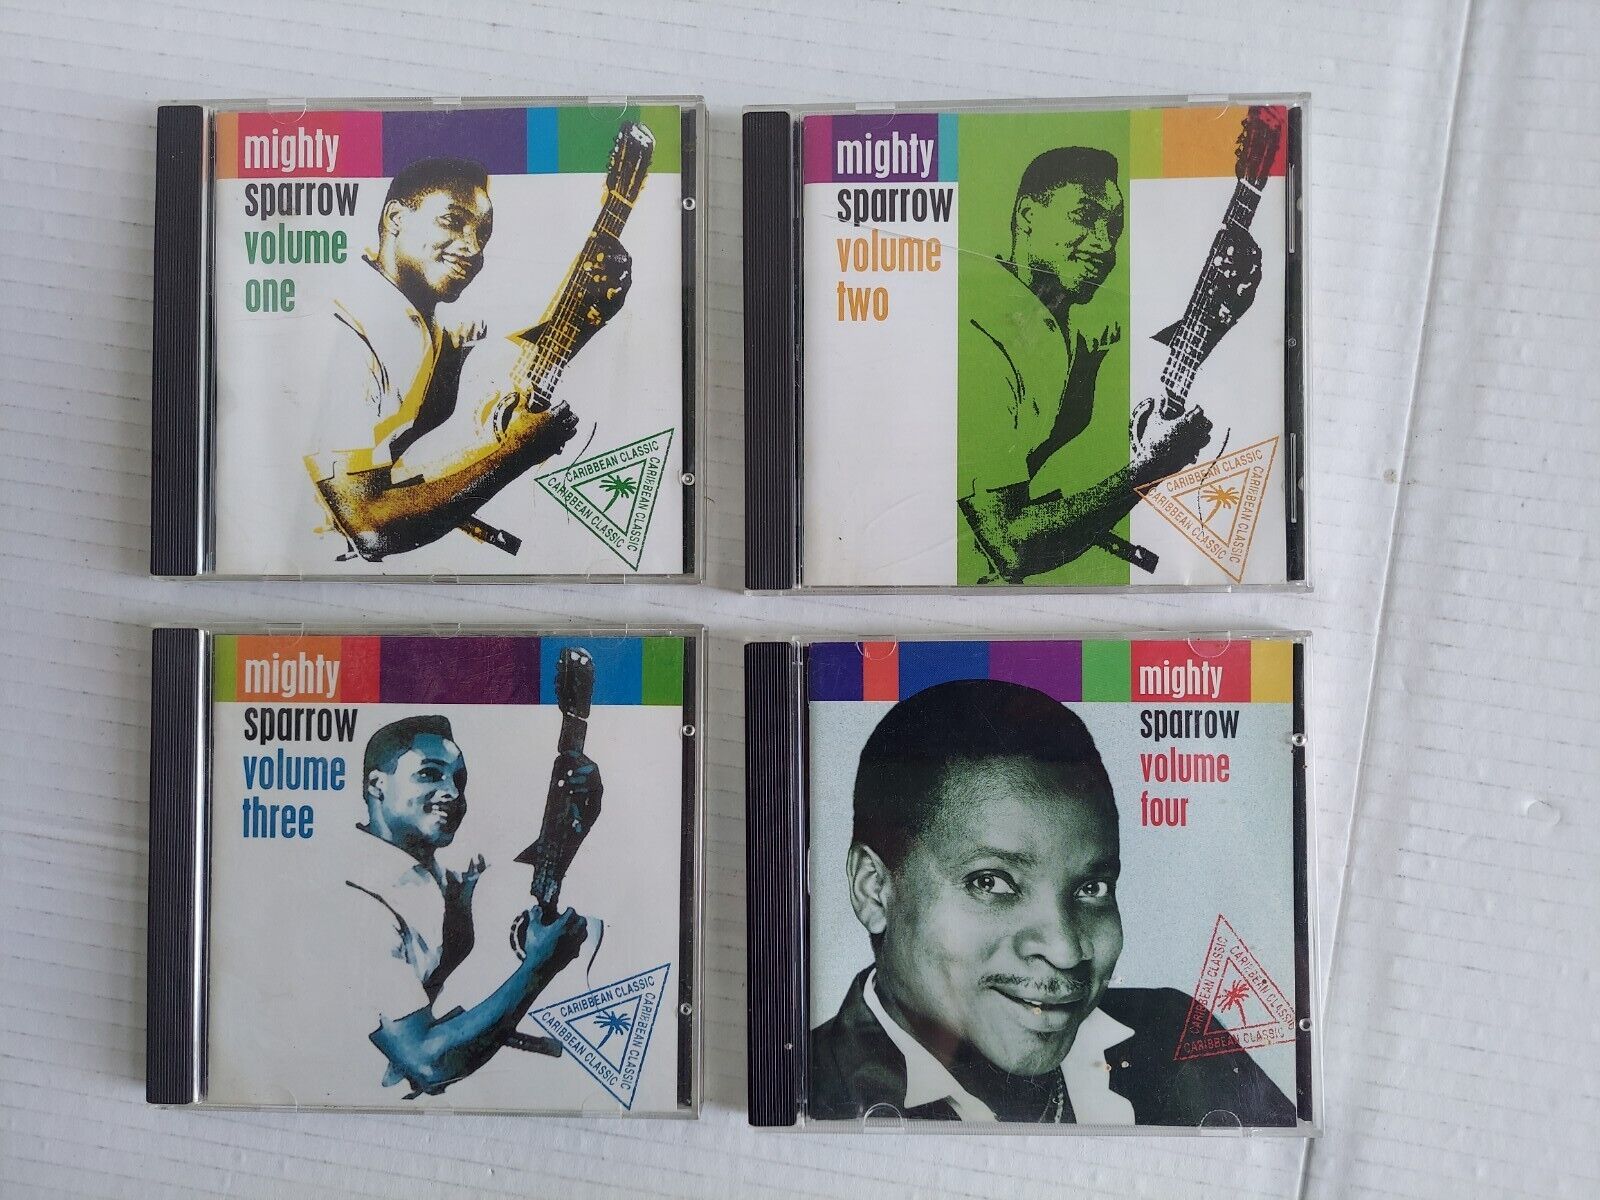 Mighty Sparrow- Volumes 1, 2, 3 & 4 (4 Cds)  ICE Records 1992